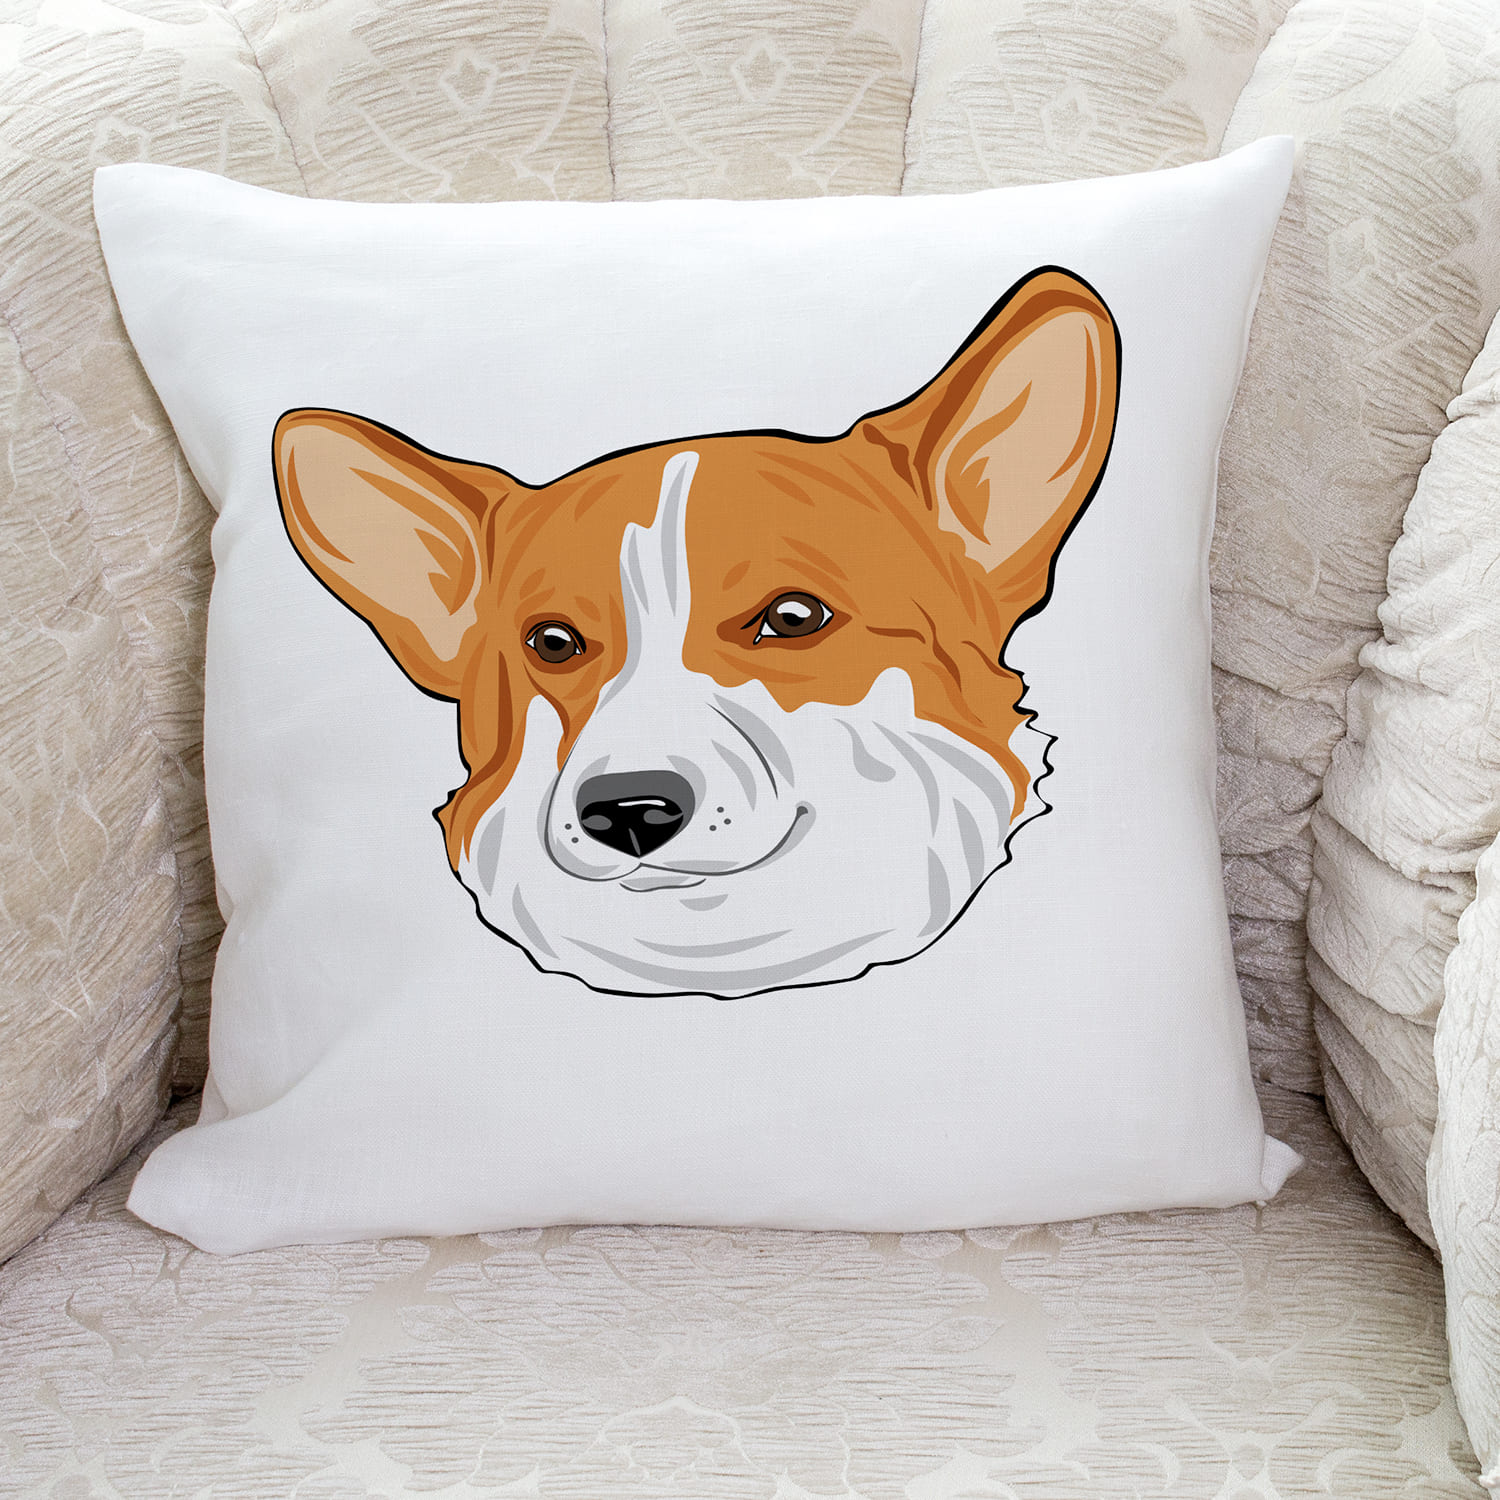 Pillow with a dog's face on it.